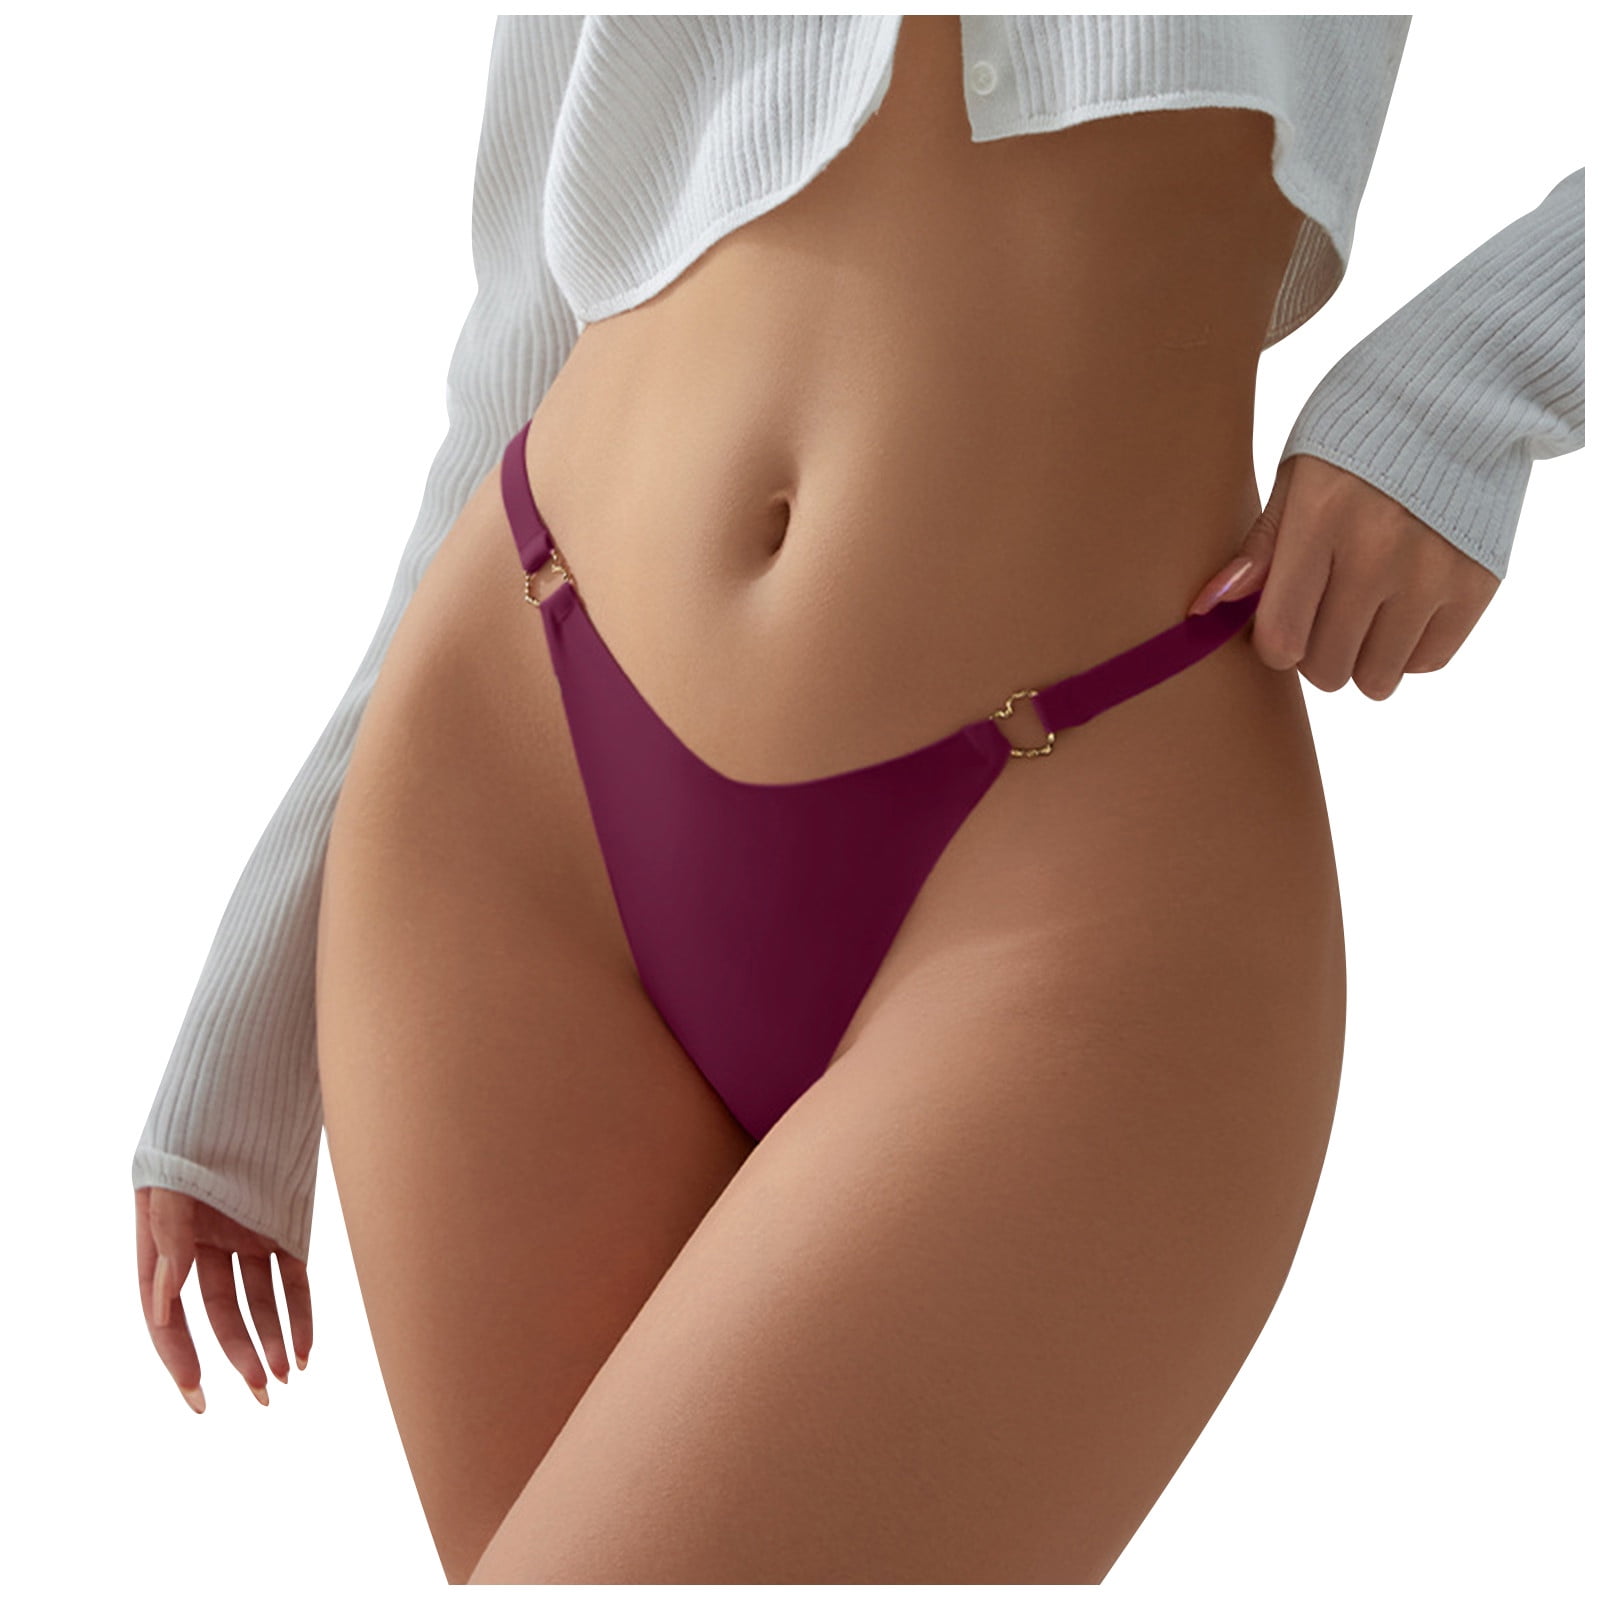 Qcmgmg Plus Size Womens Underwear Full Coverage Lace Sexy Low Waisted Thong  Bikini No Show Strappy Soft Cute Panties for Teen Girls Purple Free Size 